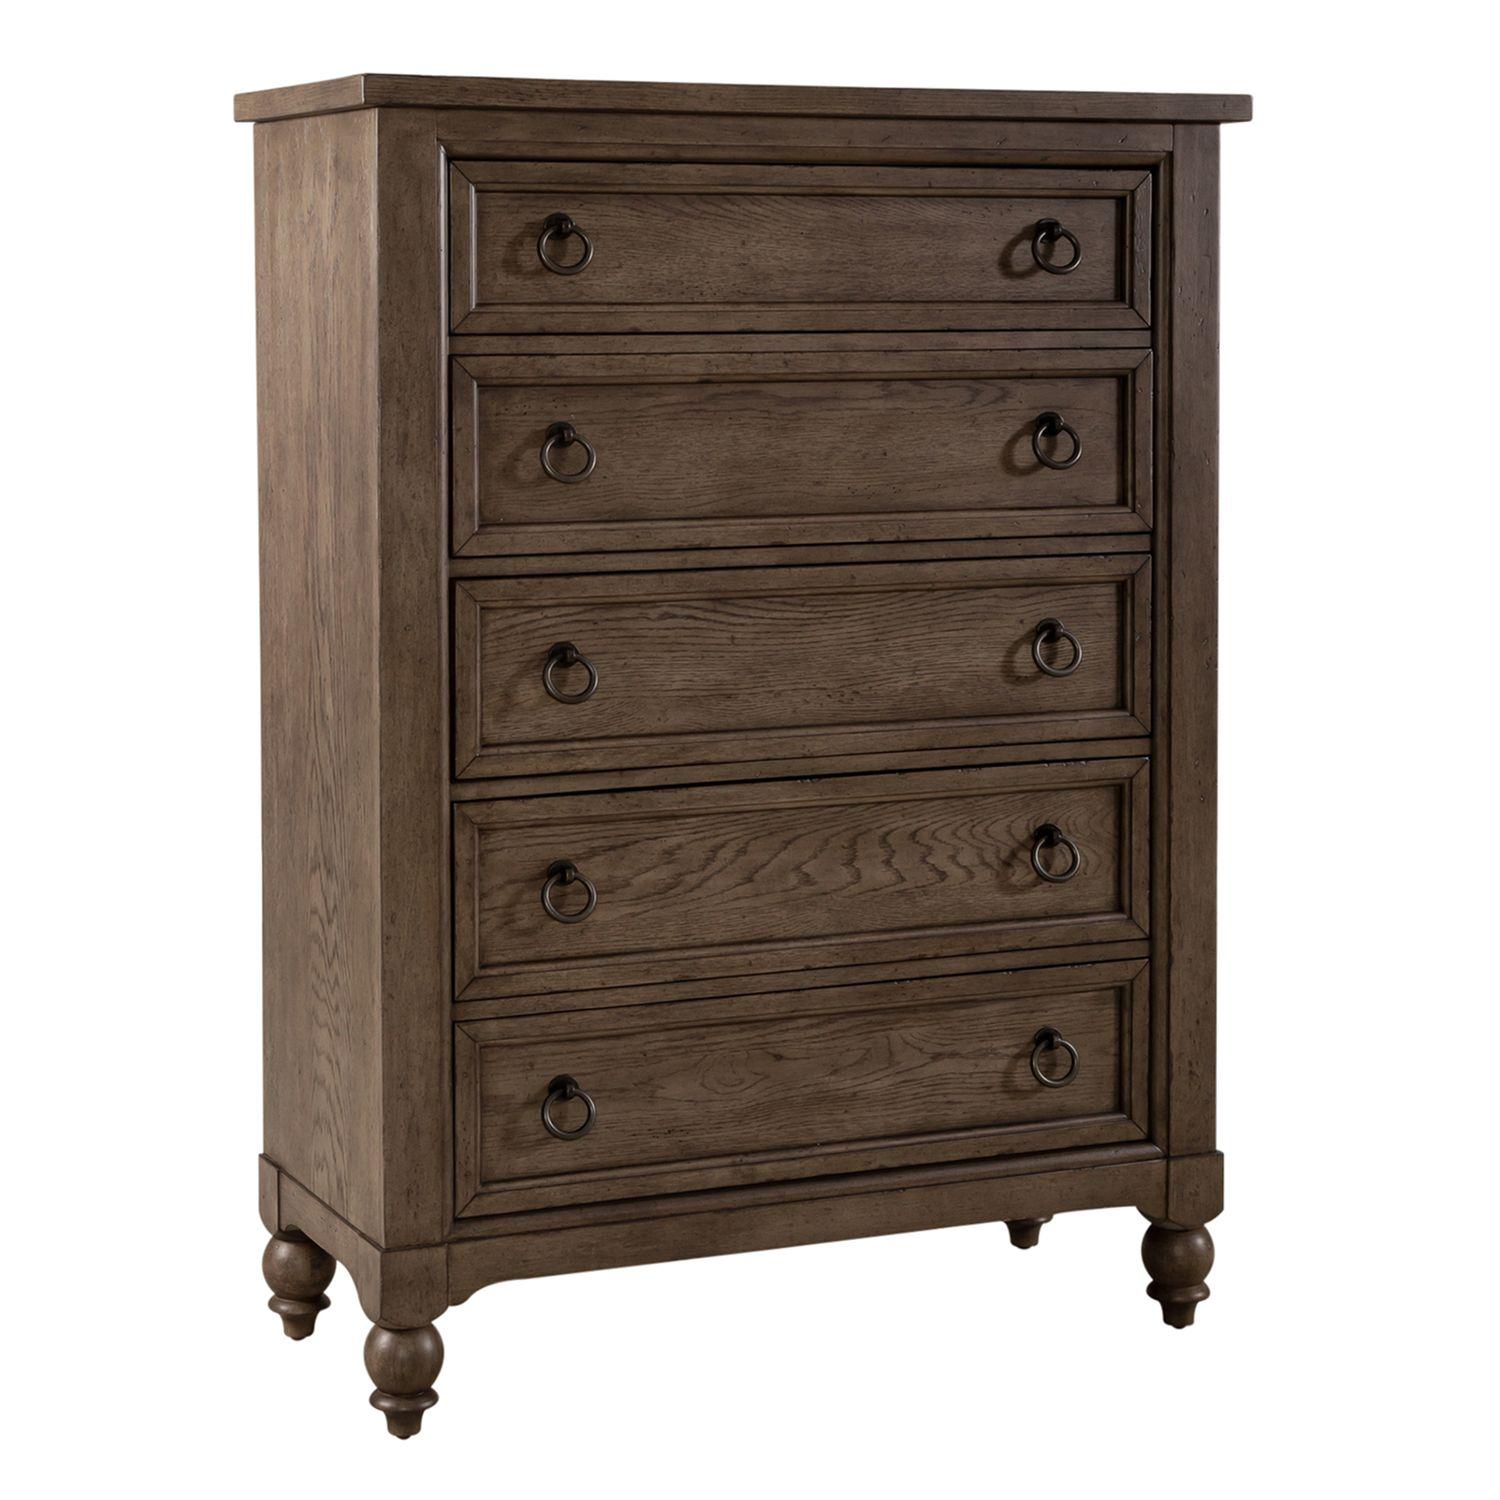 Transitional Chest Americana Farmhouse (615-BR) 615-BR41 in Taupe 